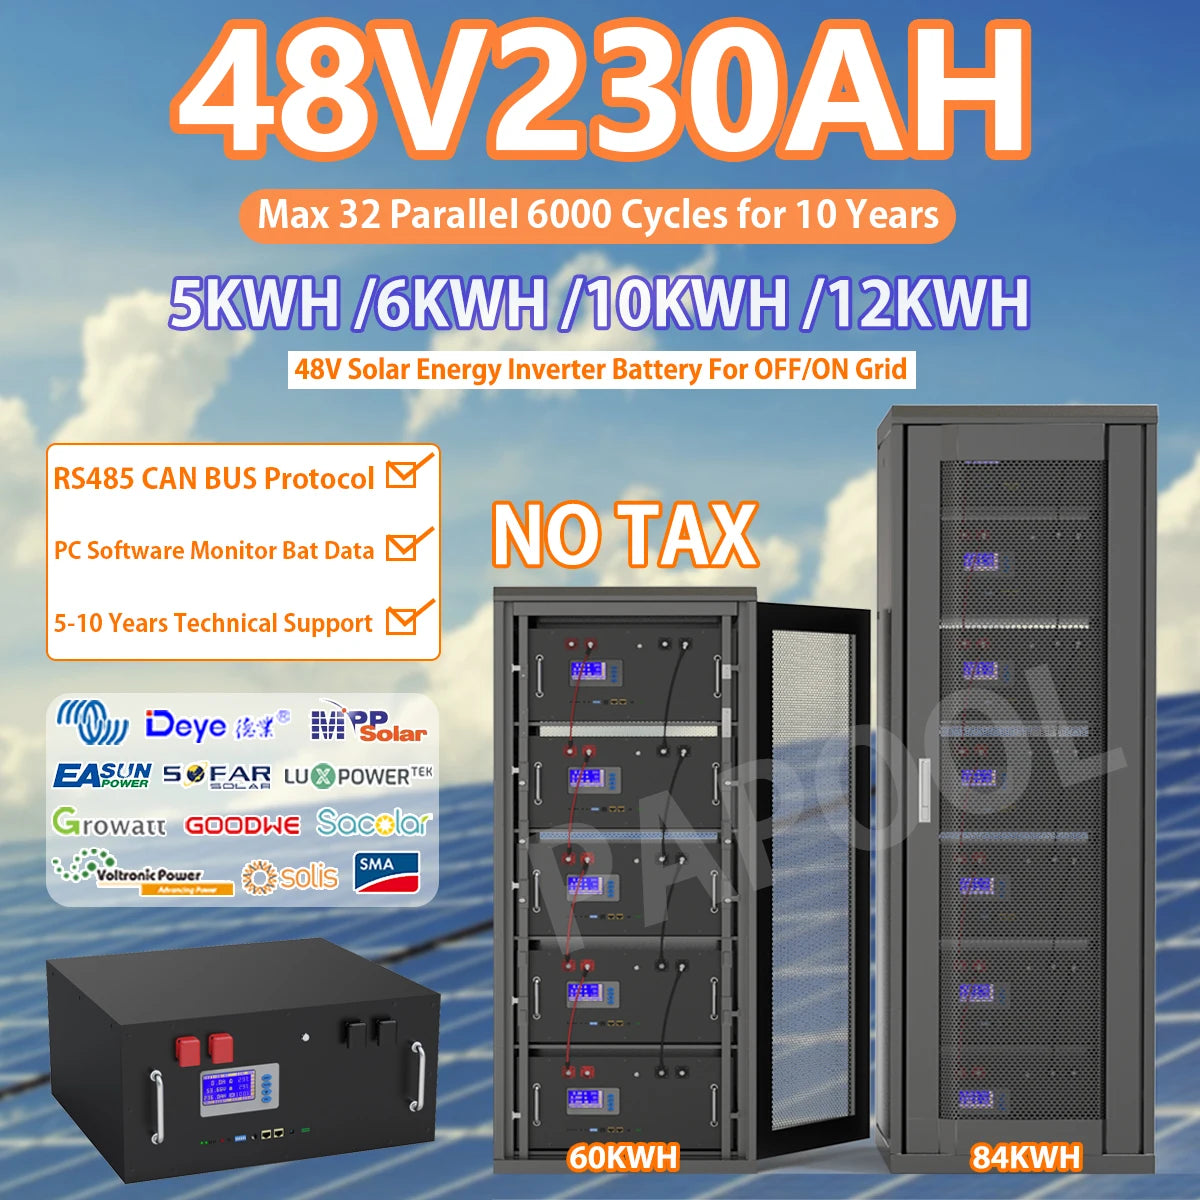 LiFePO4 48V 230Ah 200Ah 100Ah Battery, High-capacity LiFePO4 battery pack for solar energy systems, designed for 10-year lifespan.